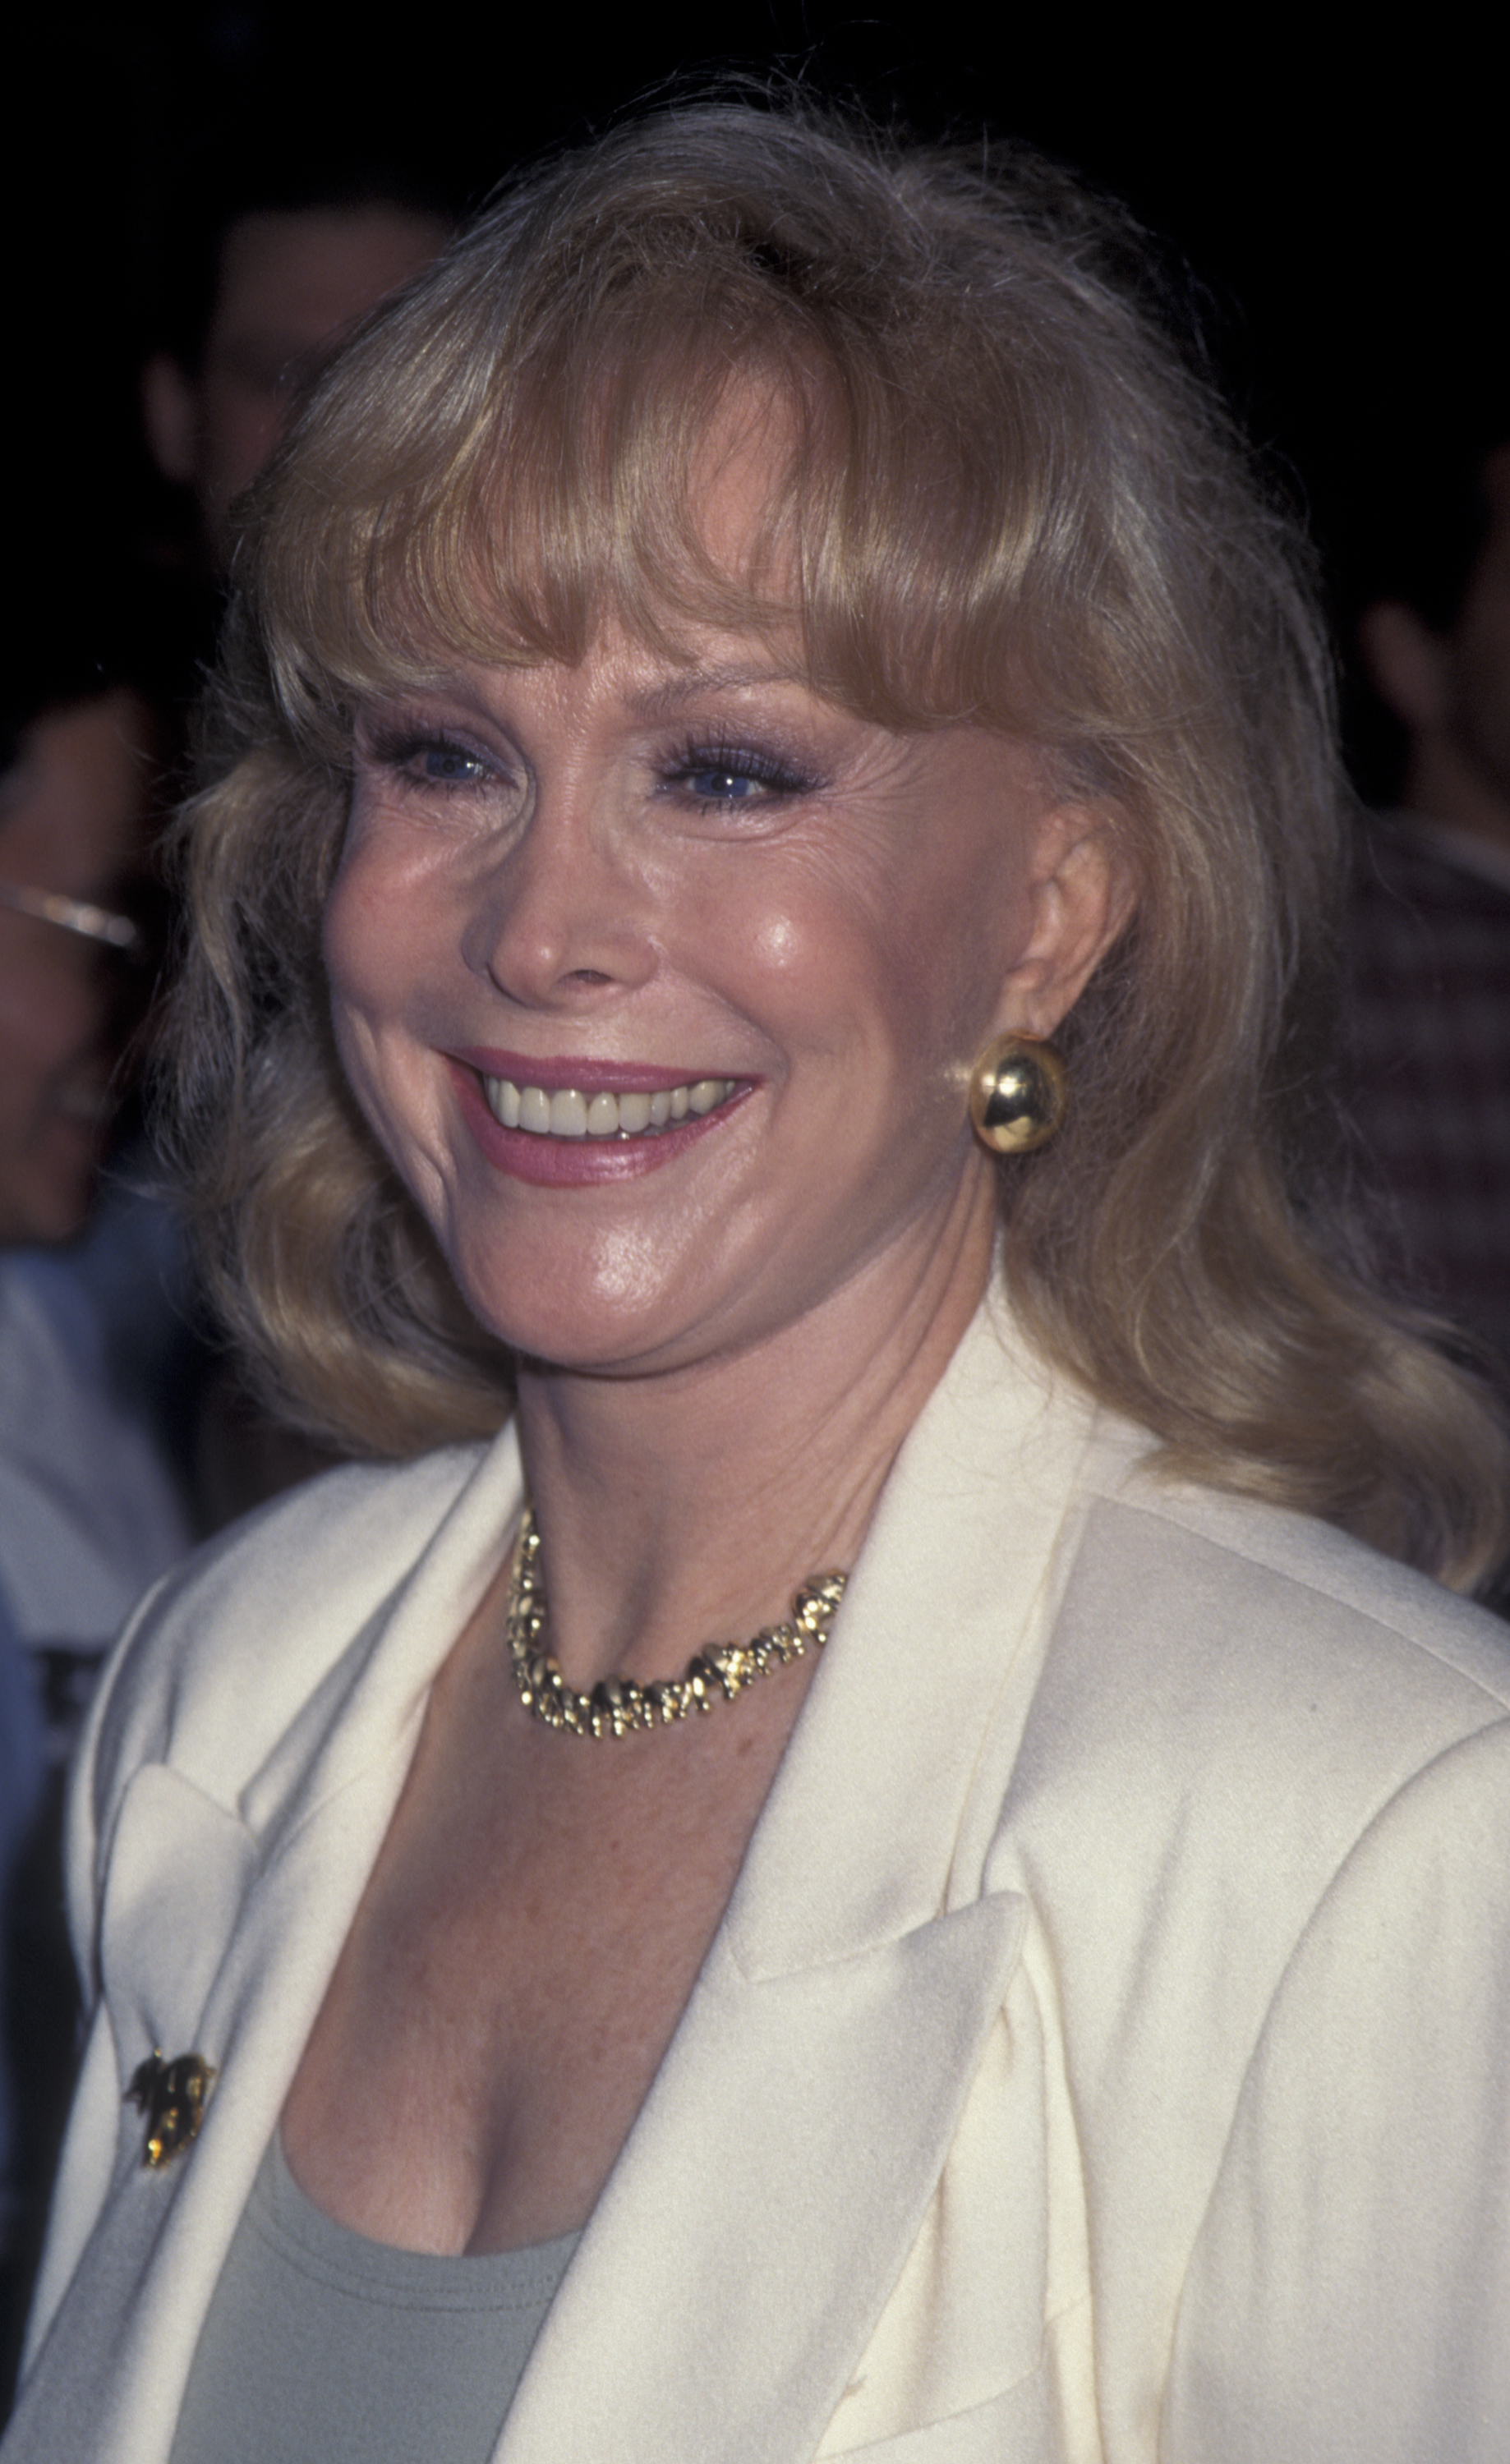 Barbara Eden attends the world premiere of "Broken Arrow" on February 5, 1996, at Mann National Theater in Westwood, California. | Source: Getty Images